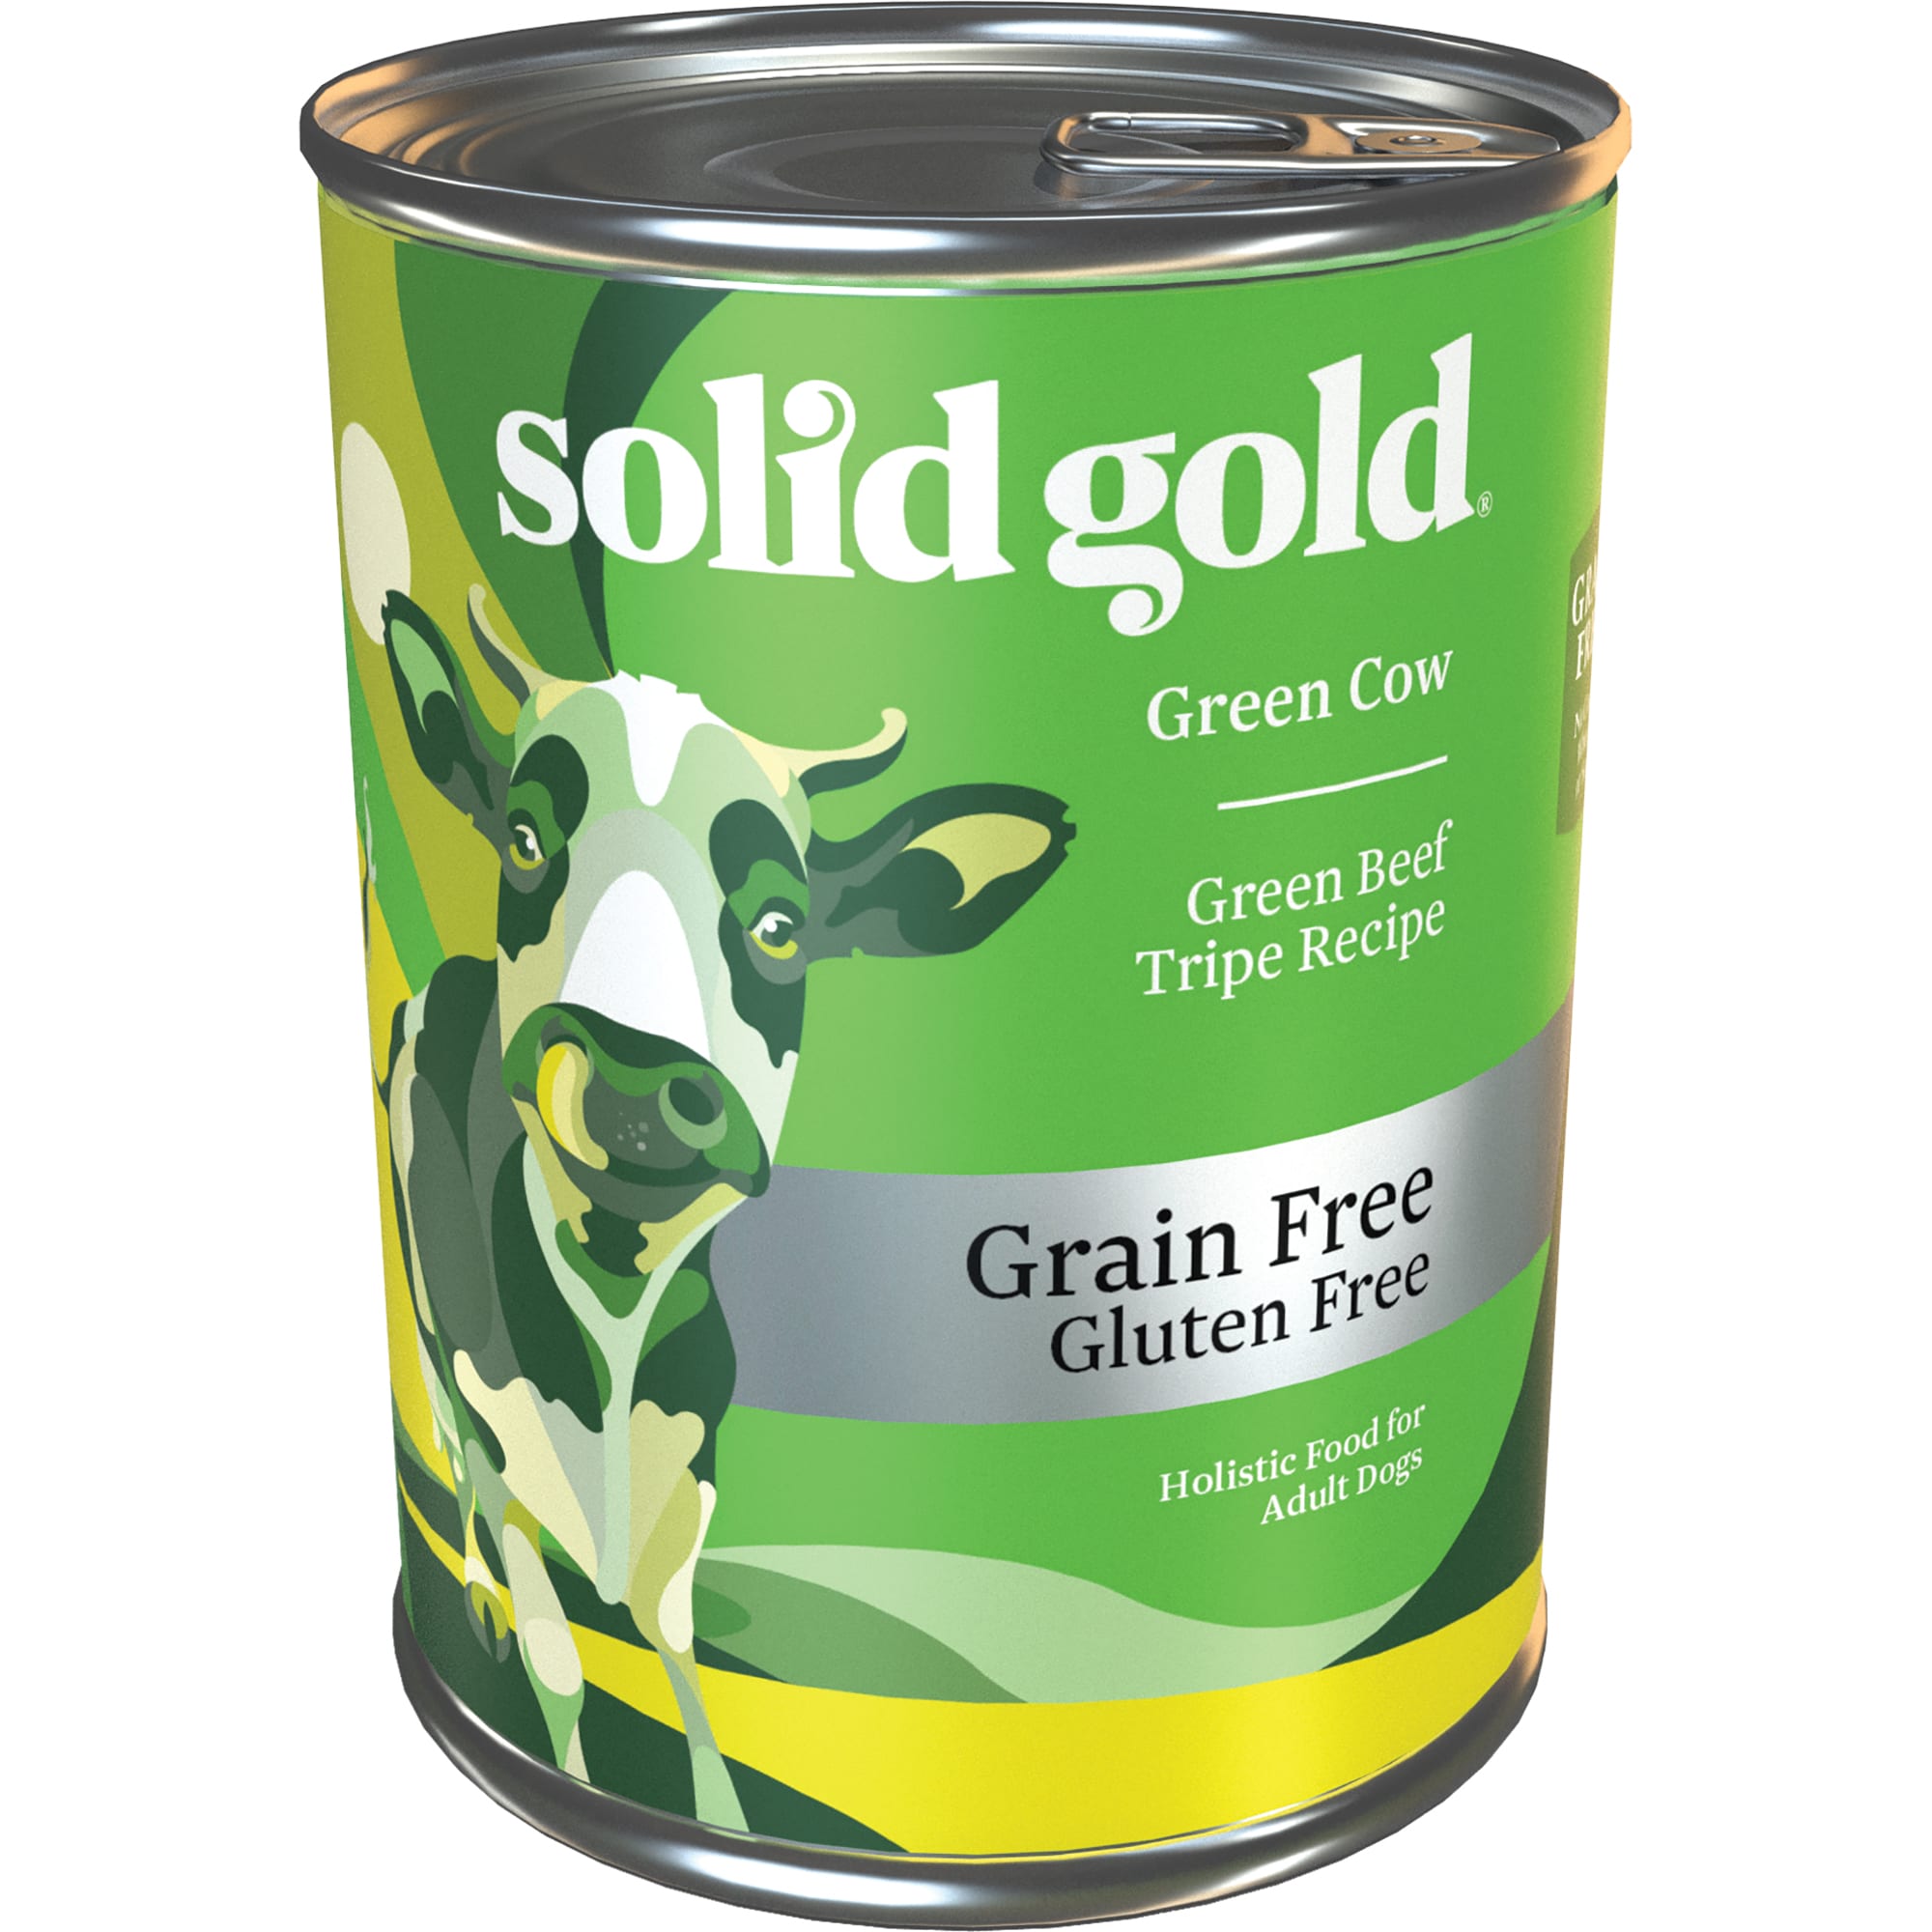 solid gold green cow